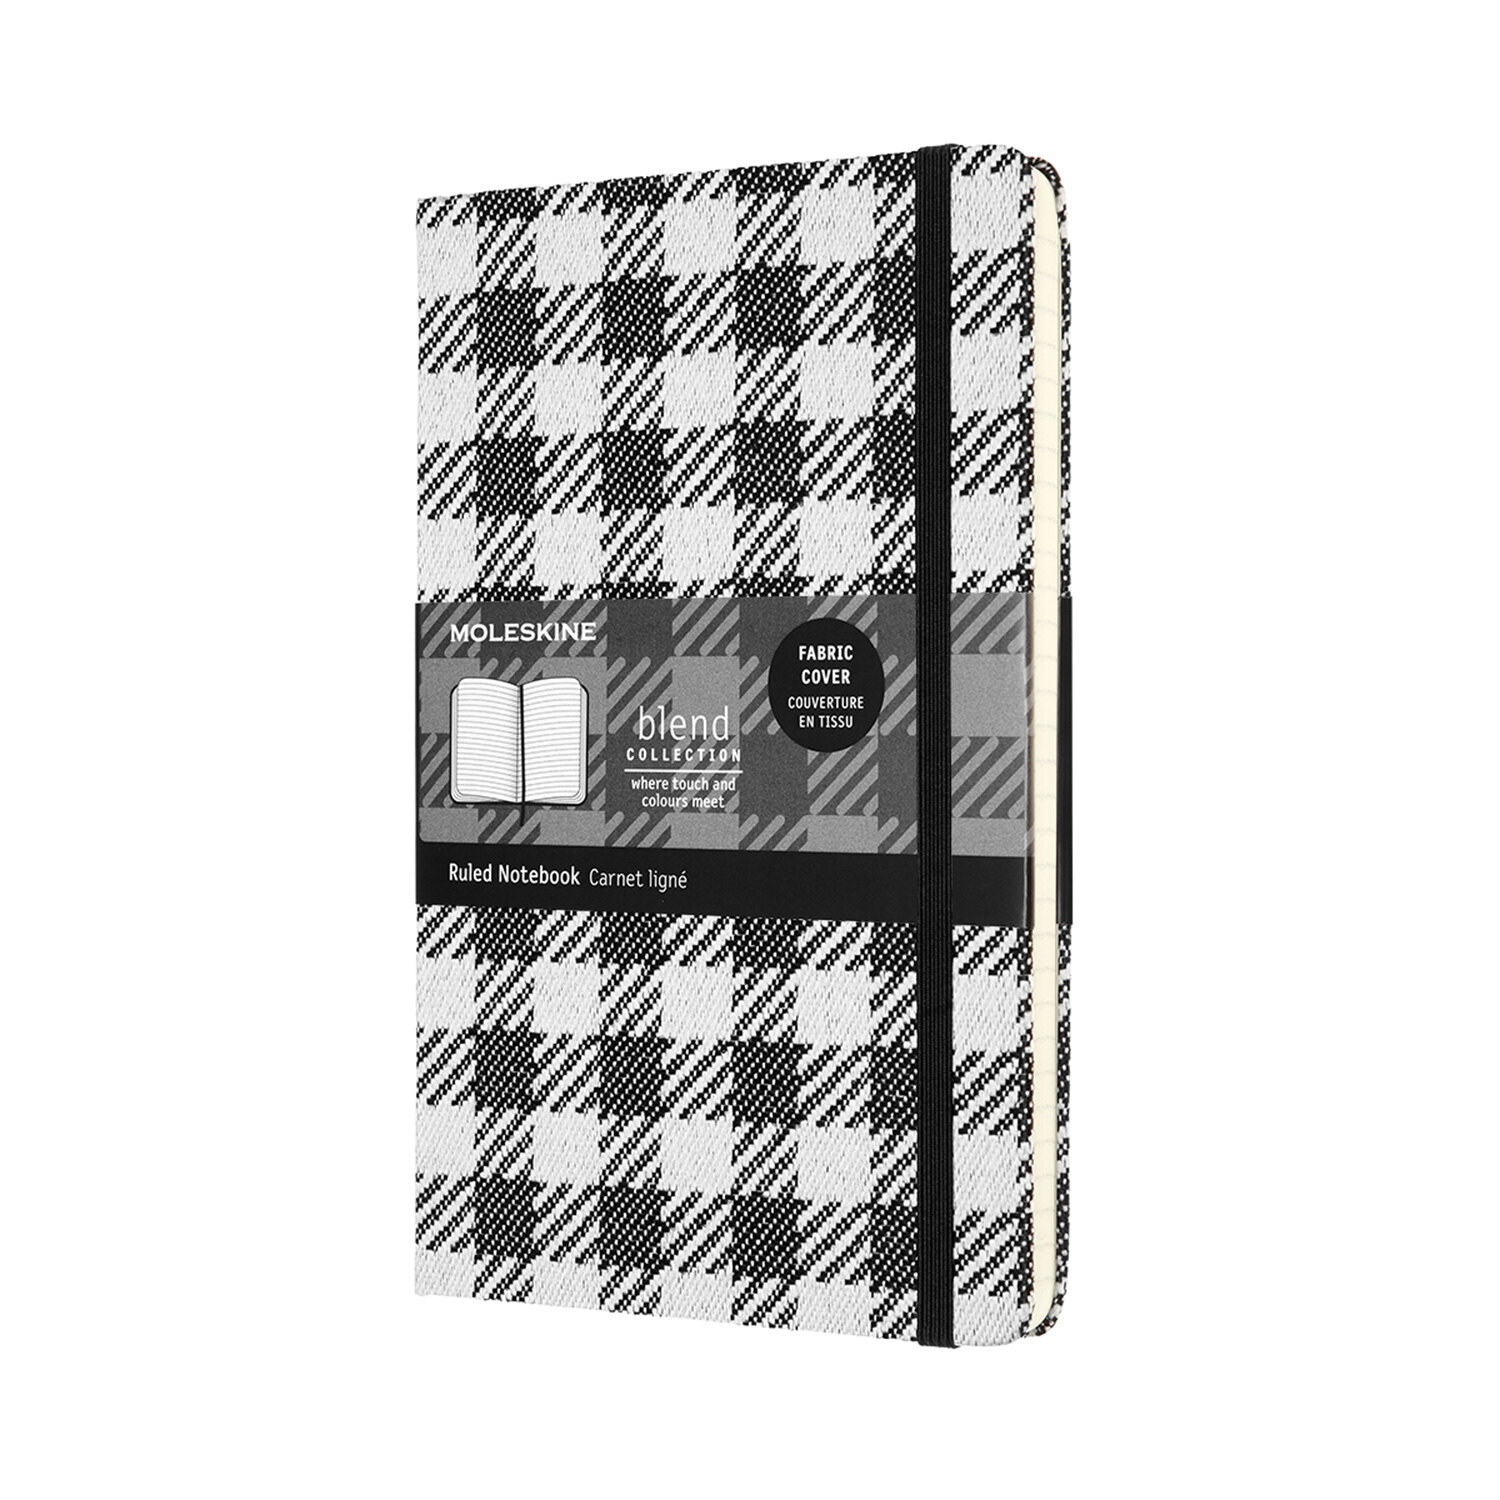 Moleskine Limited Collection Notebook, Blend, Large, Ruled, Check Pattern, Hard Cover (5 X 8.25) (Hardcover)